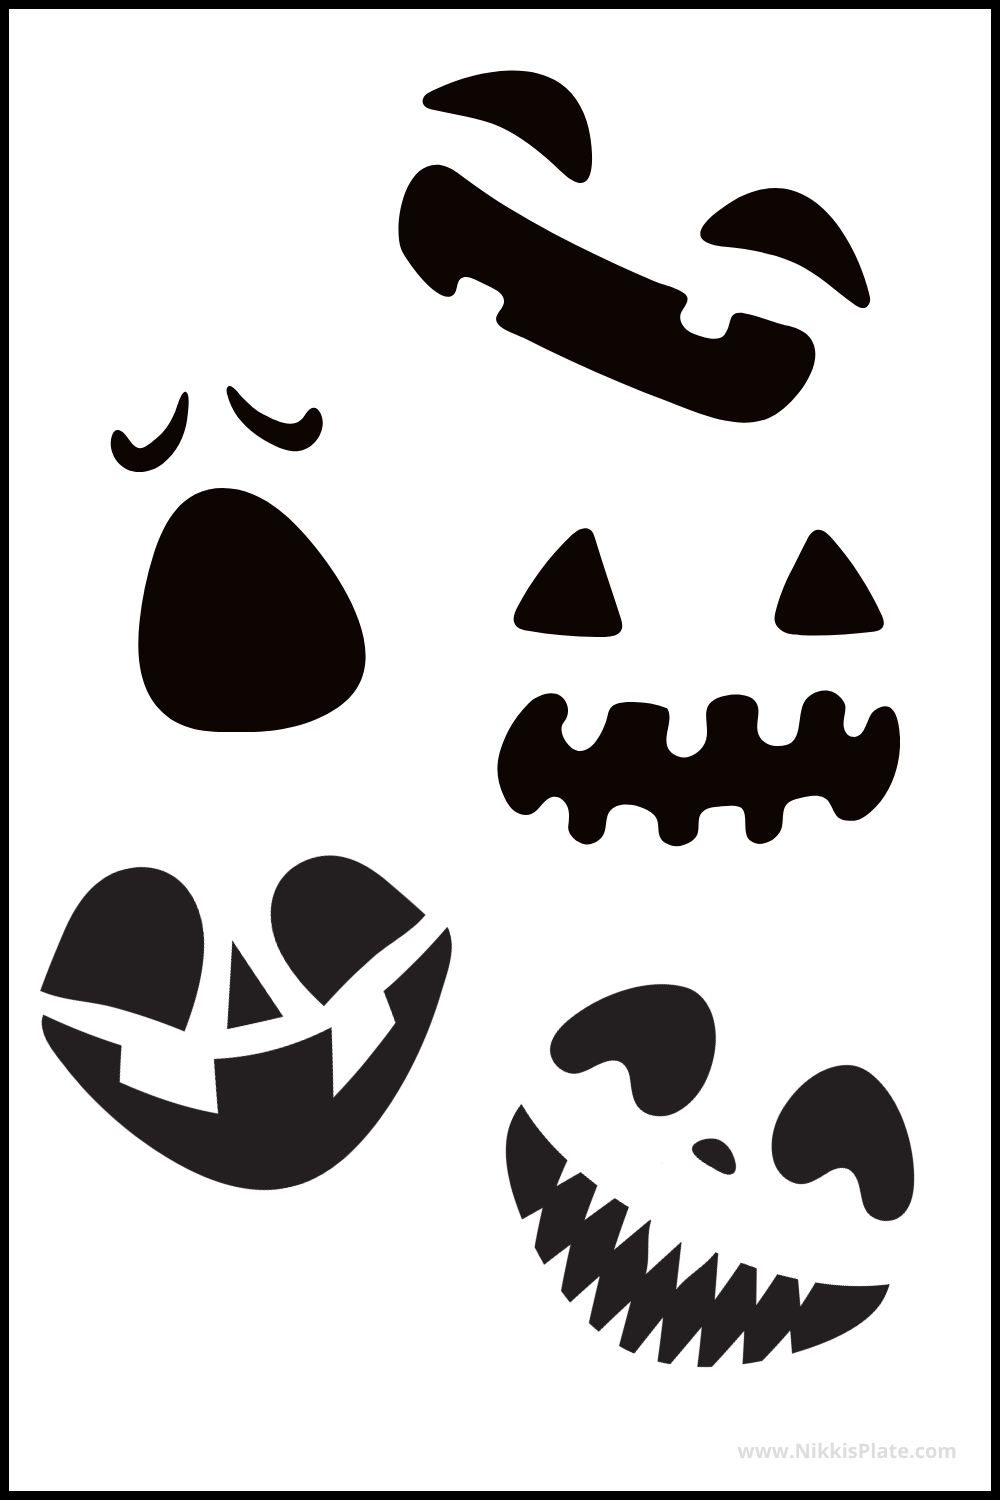 Unleash your creativity this Halloween with our 25 FREE Creepy Jack O'lantern Faces Printable Stencils! Turn your pumpkins into the creepiest on the street with my various spooky stencil designs. Free and easy to use, because I believe in more treats, less tricks! Immerse in the Halloween spirit and let the carving fun begin!